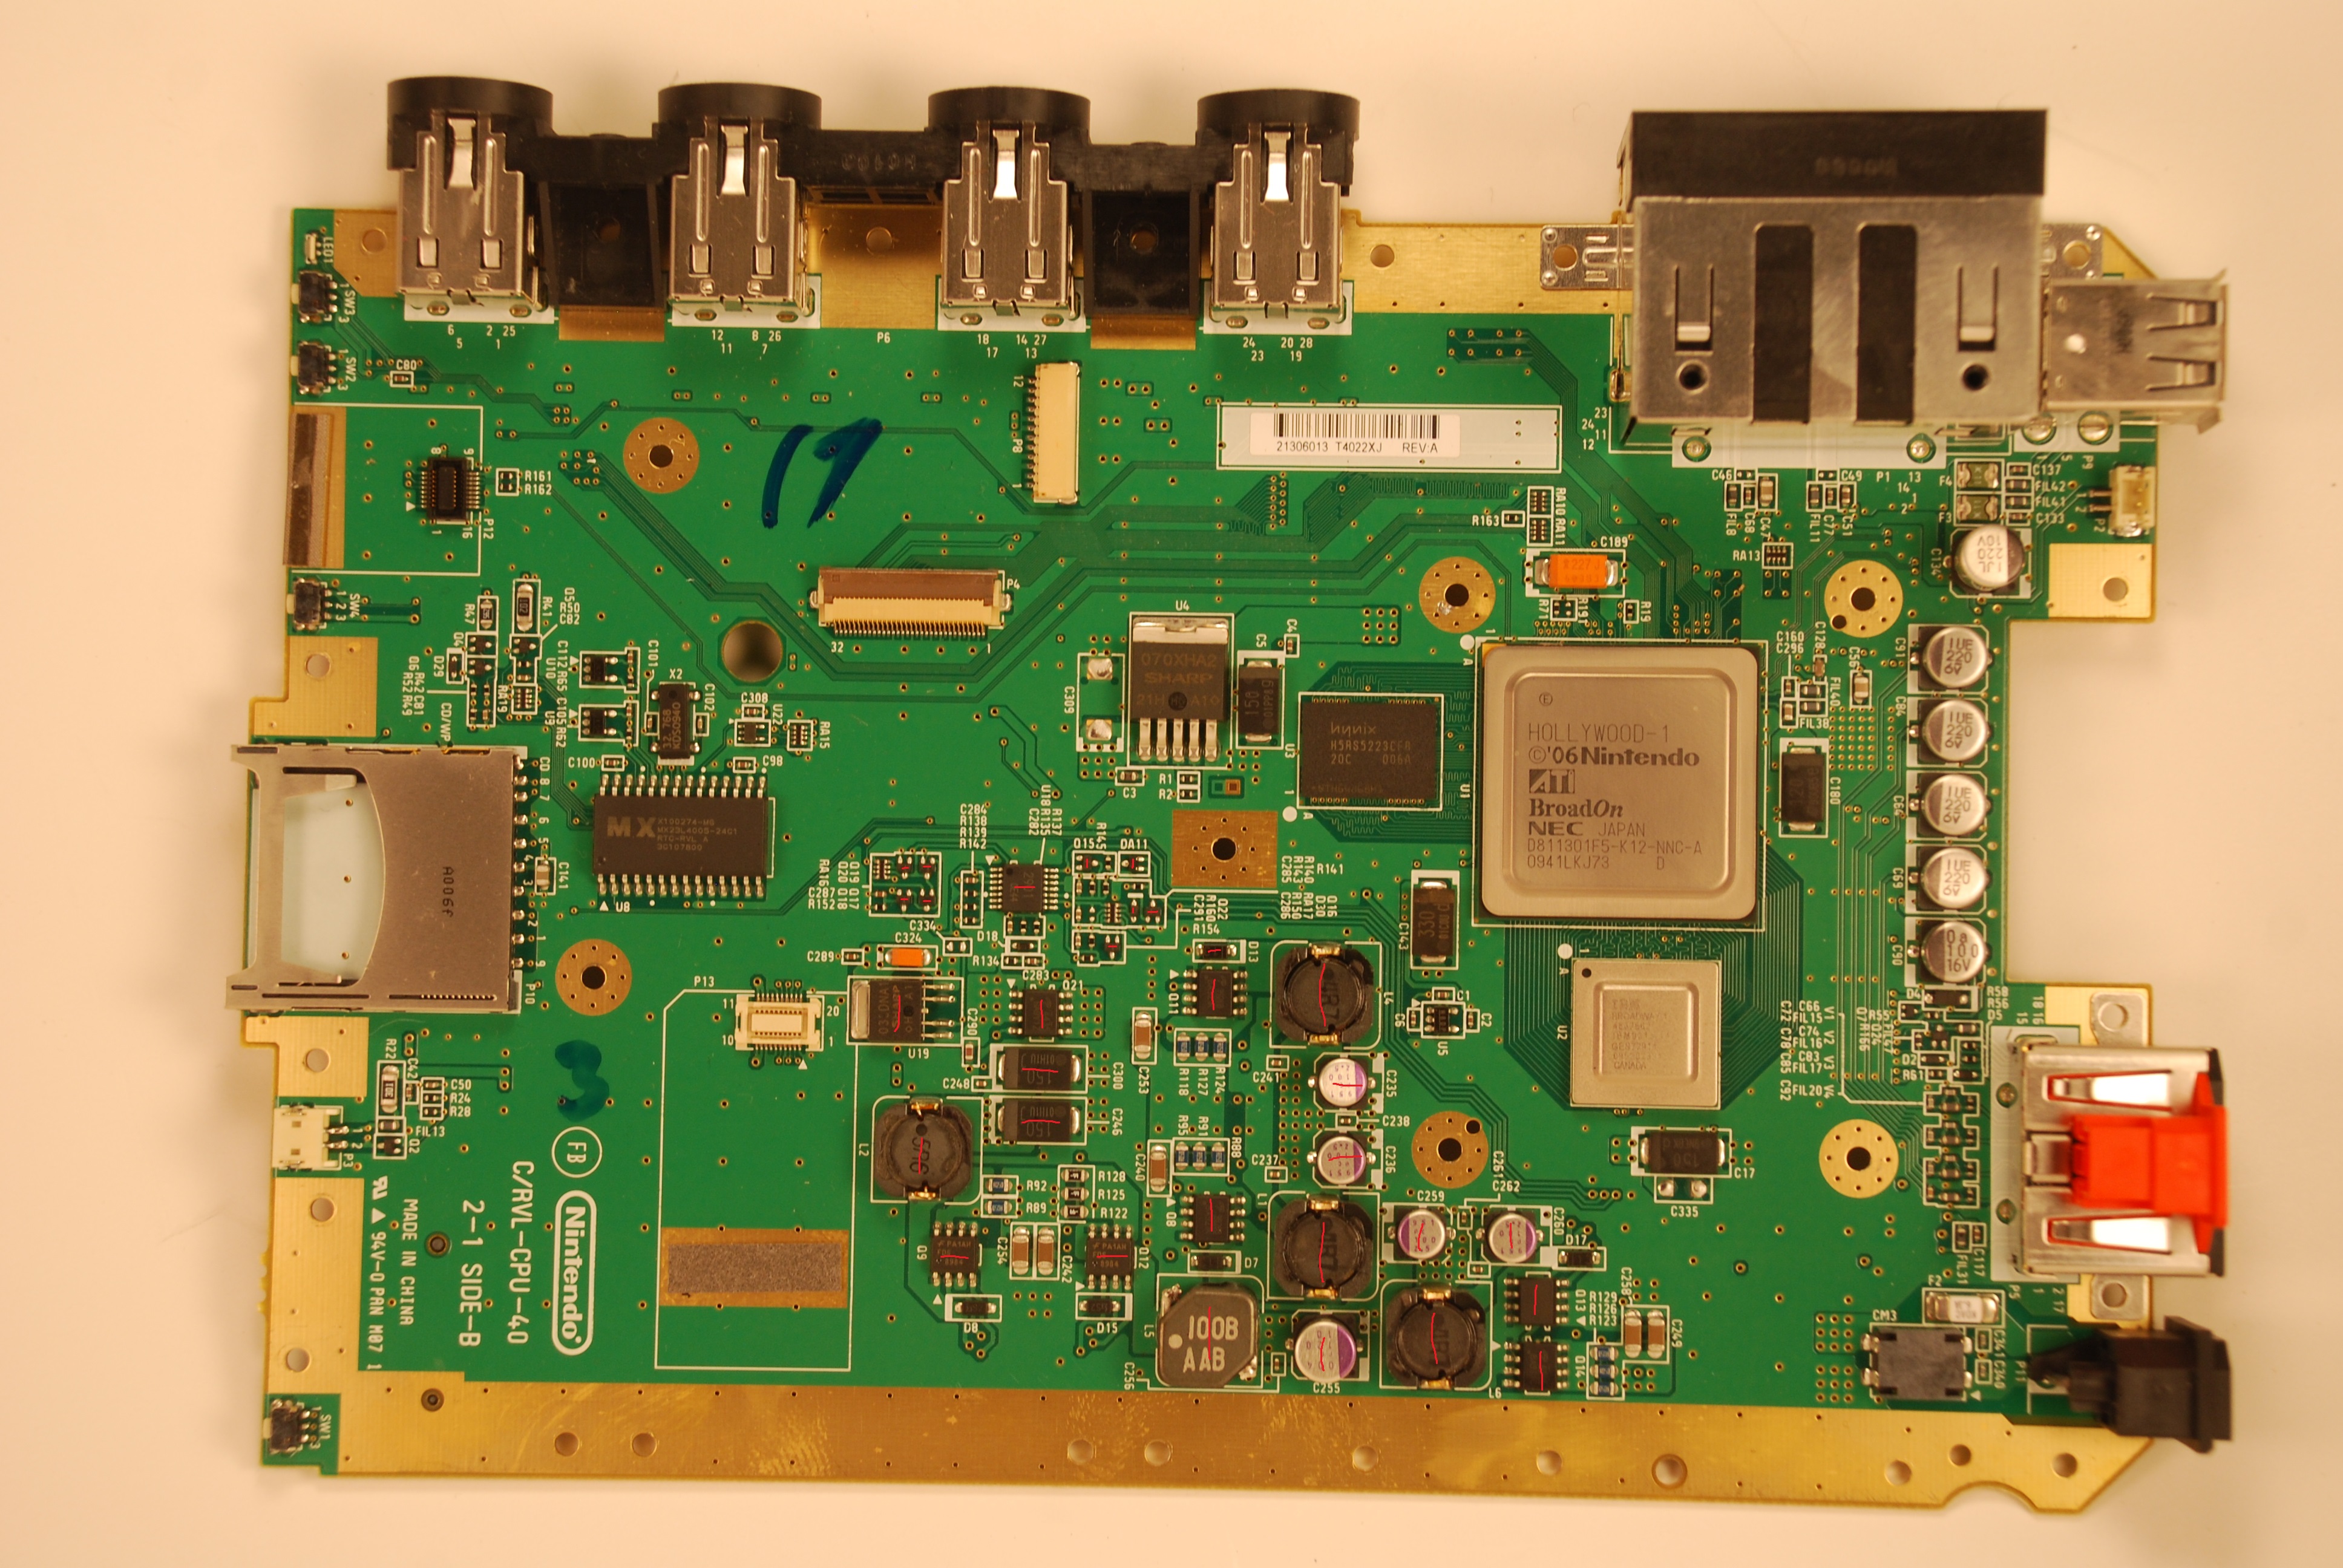 Wii rp 40 top with components removed.jpg